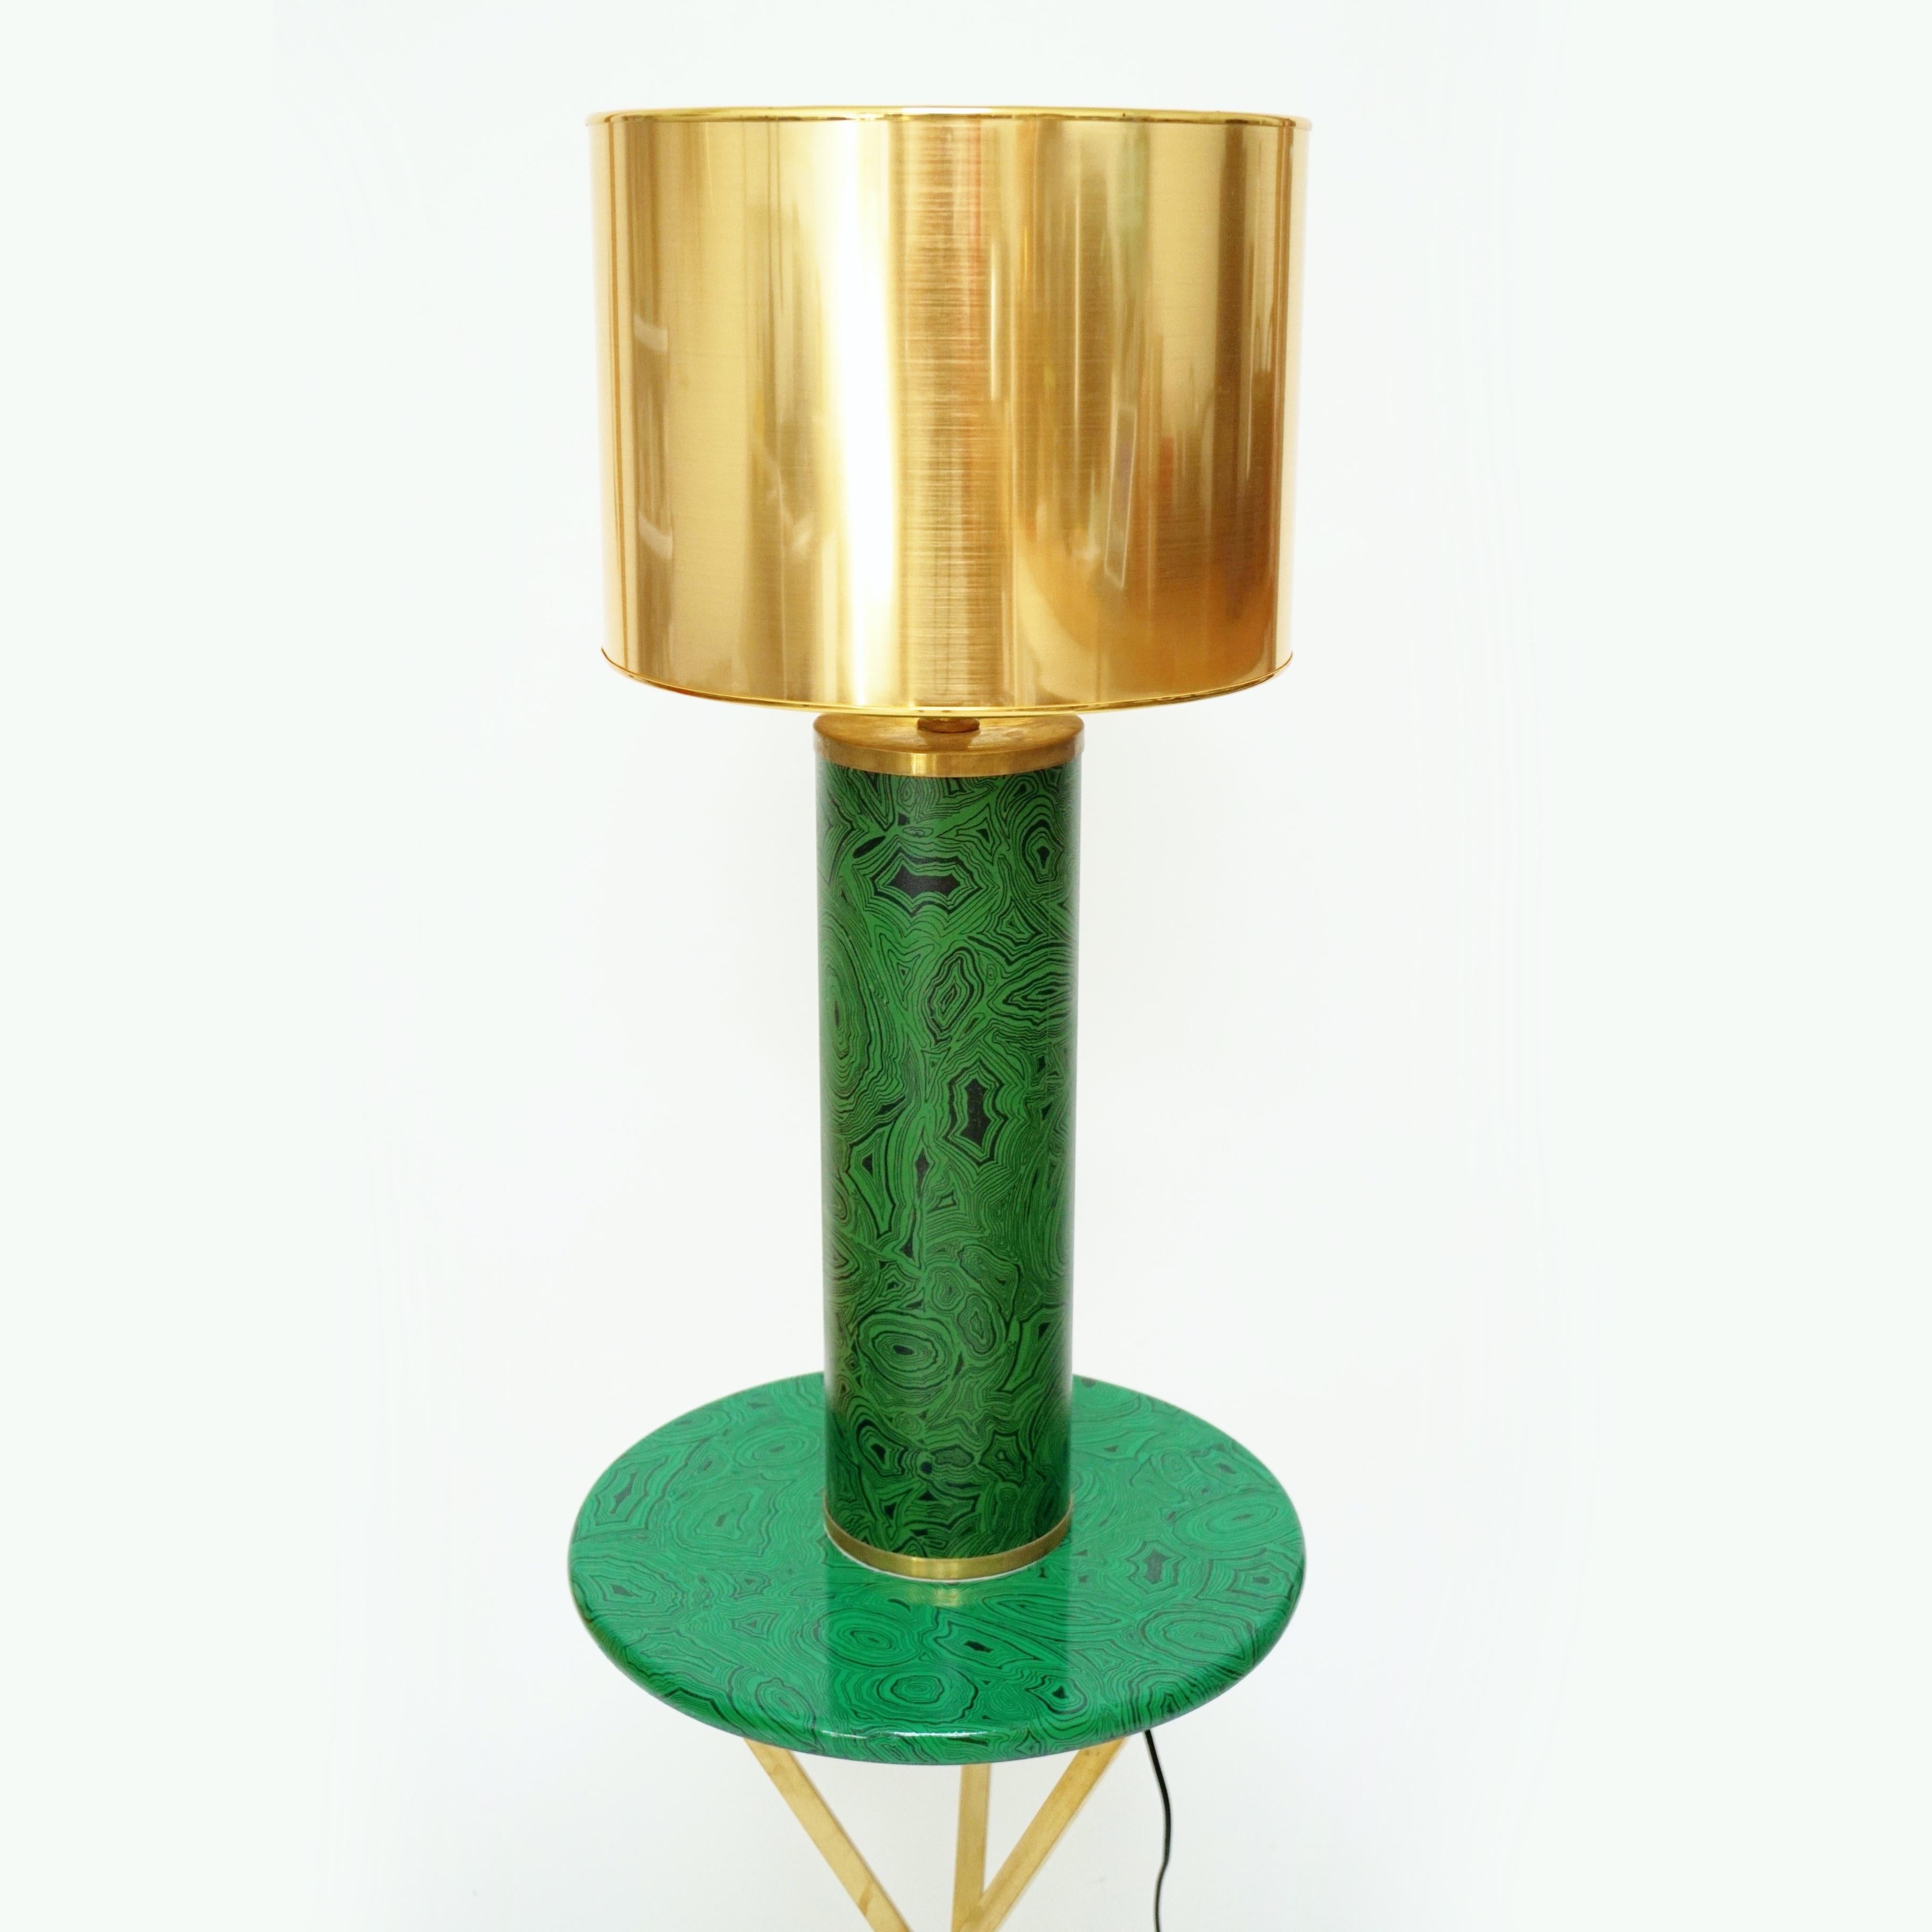 - Vintage lamp base by collectible and coveted Italian designer Piero Fornasetti
- Classic and desirable Fornasetti Malachite design
- Vibrant green color
- Currently fitted with Europlug (European Type C plug) but you can easily have rewired to